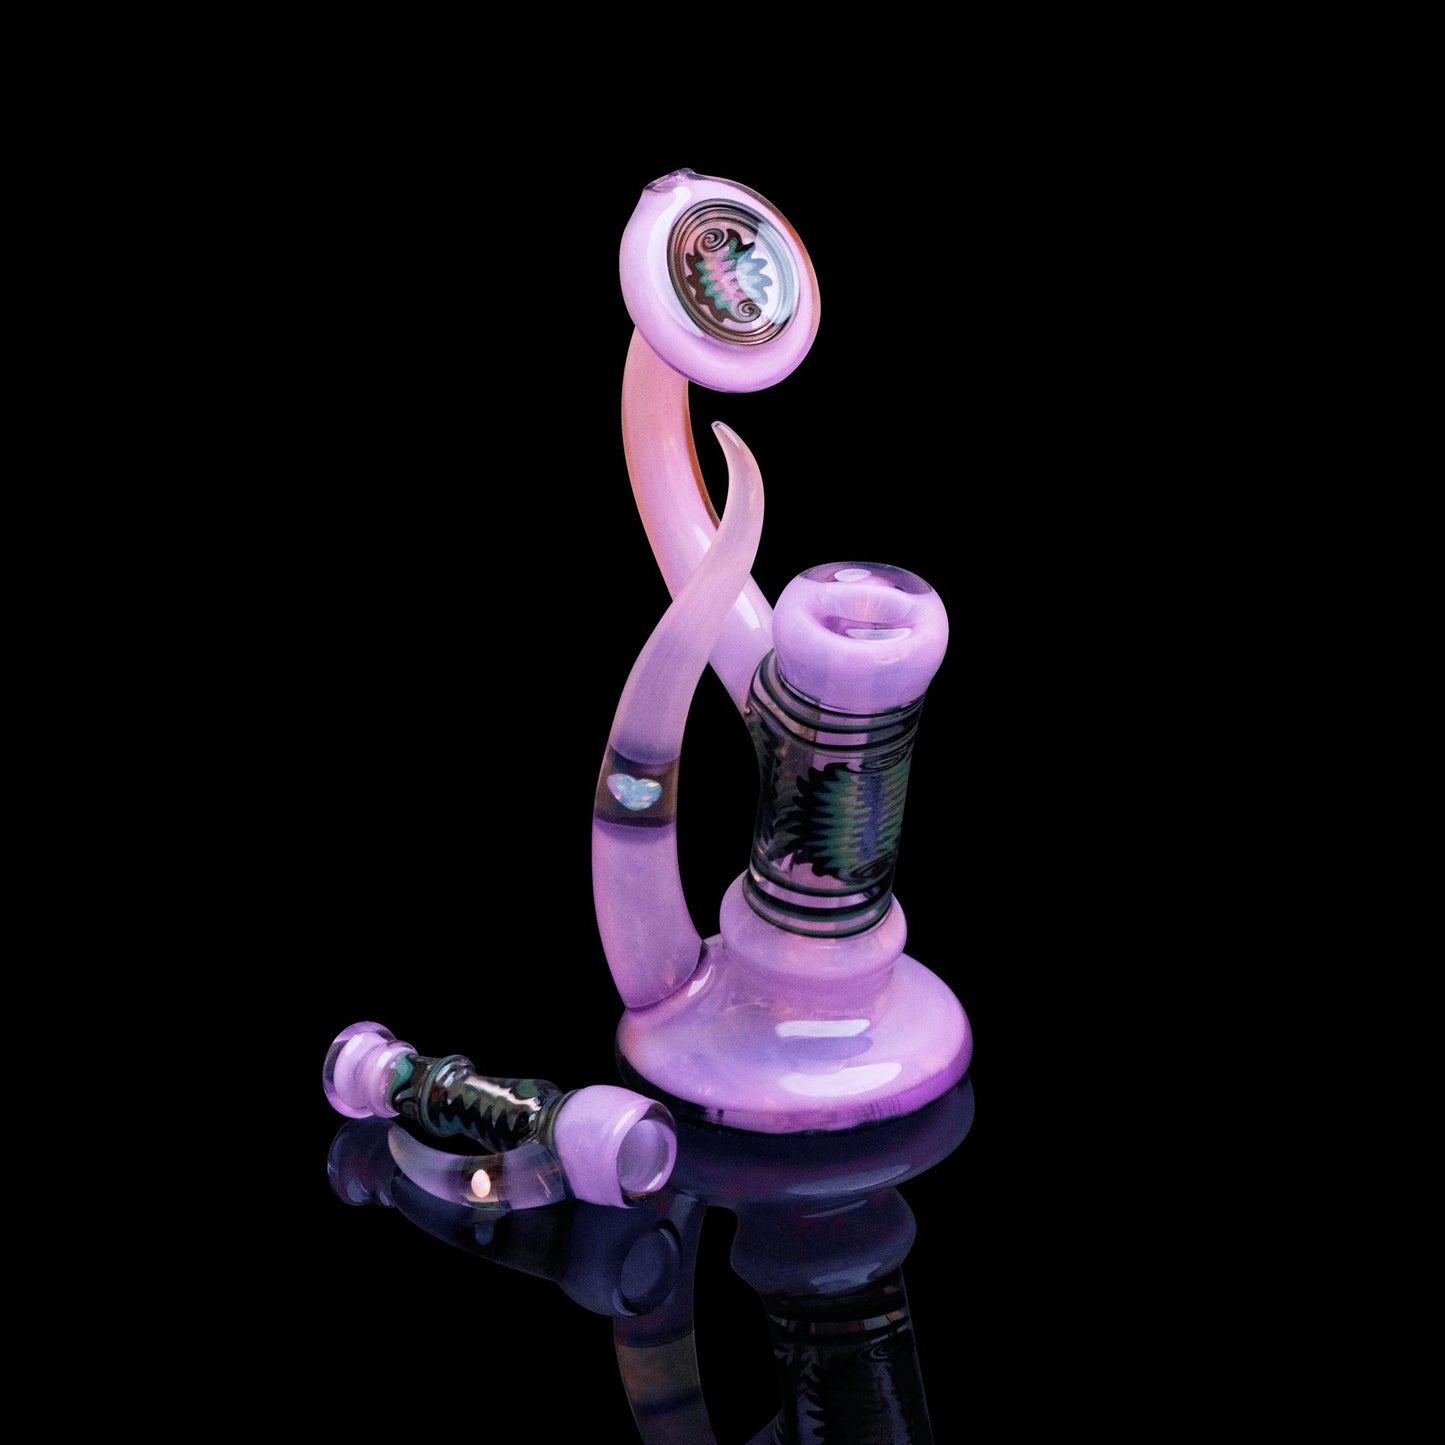 artisan-crafted design of the Purple Bubbler by Nateylove (2021)